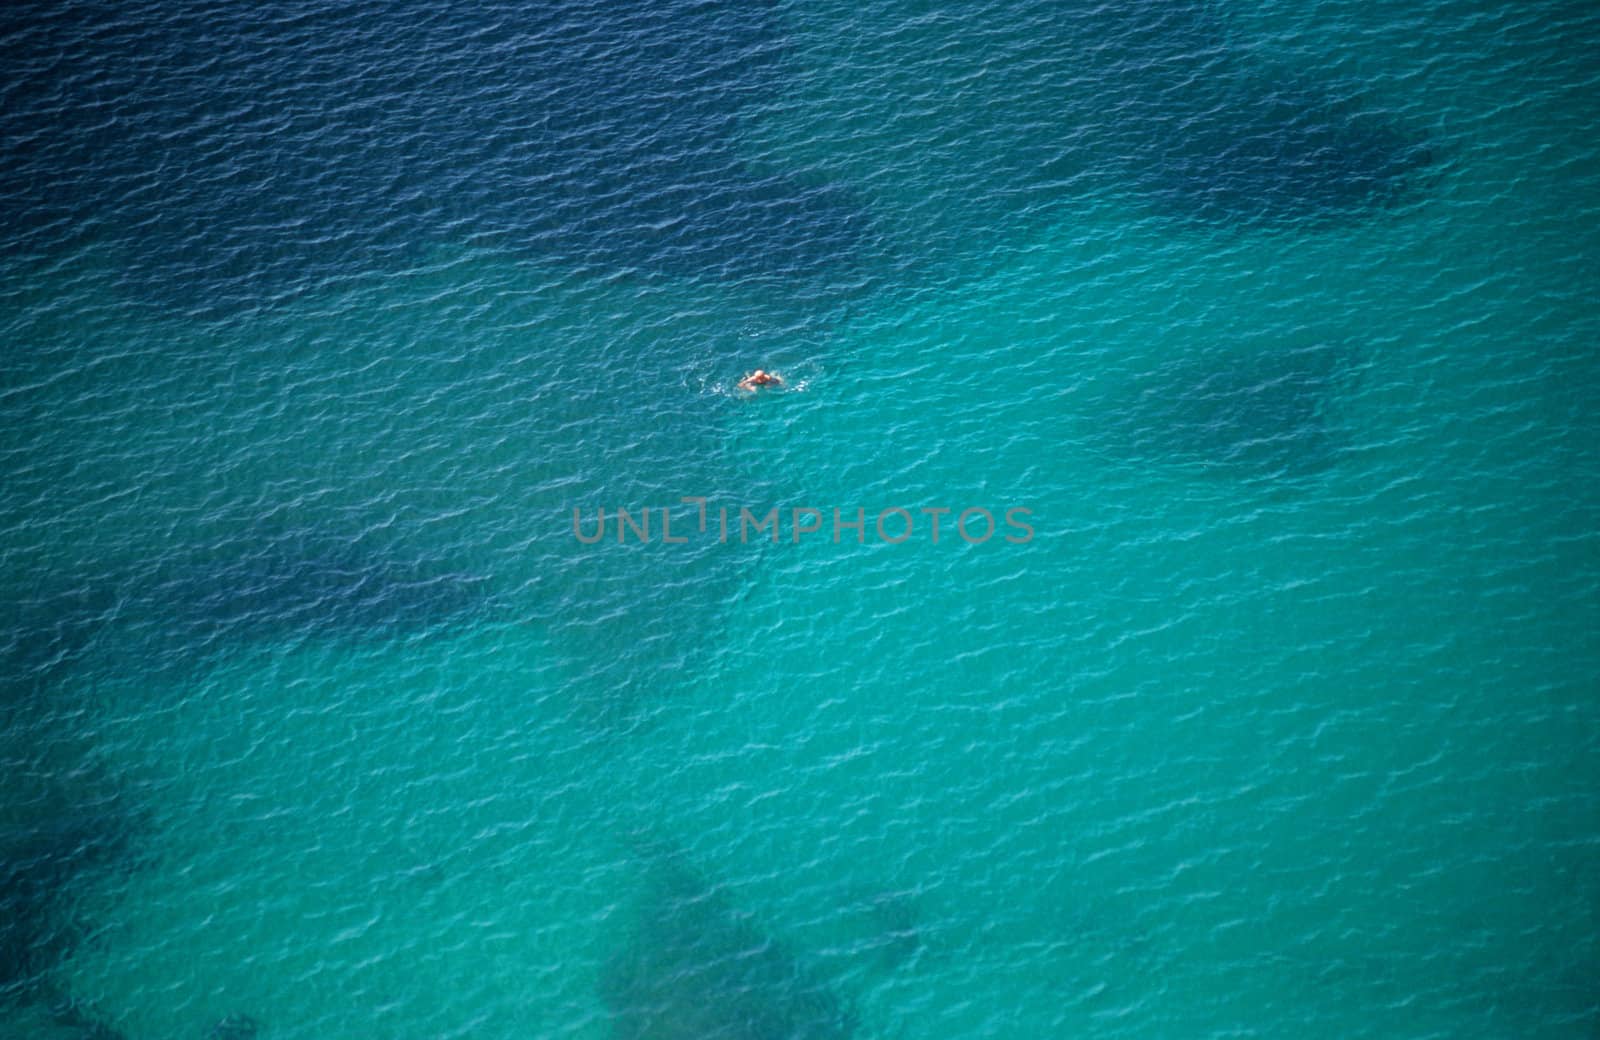 A solitary swimmer paddles in the Mediterranean sea.